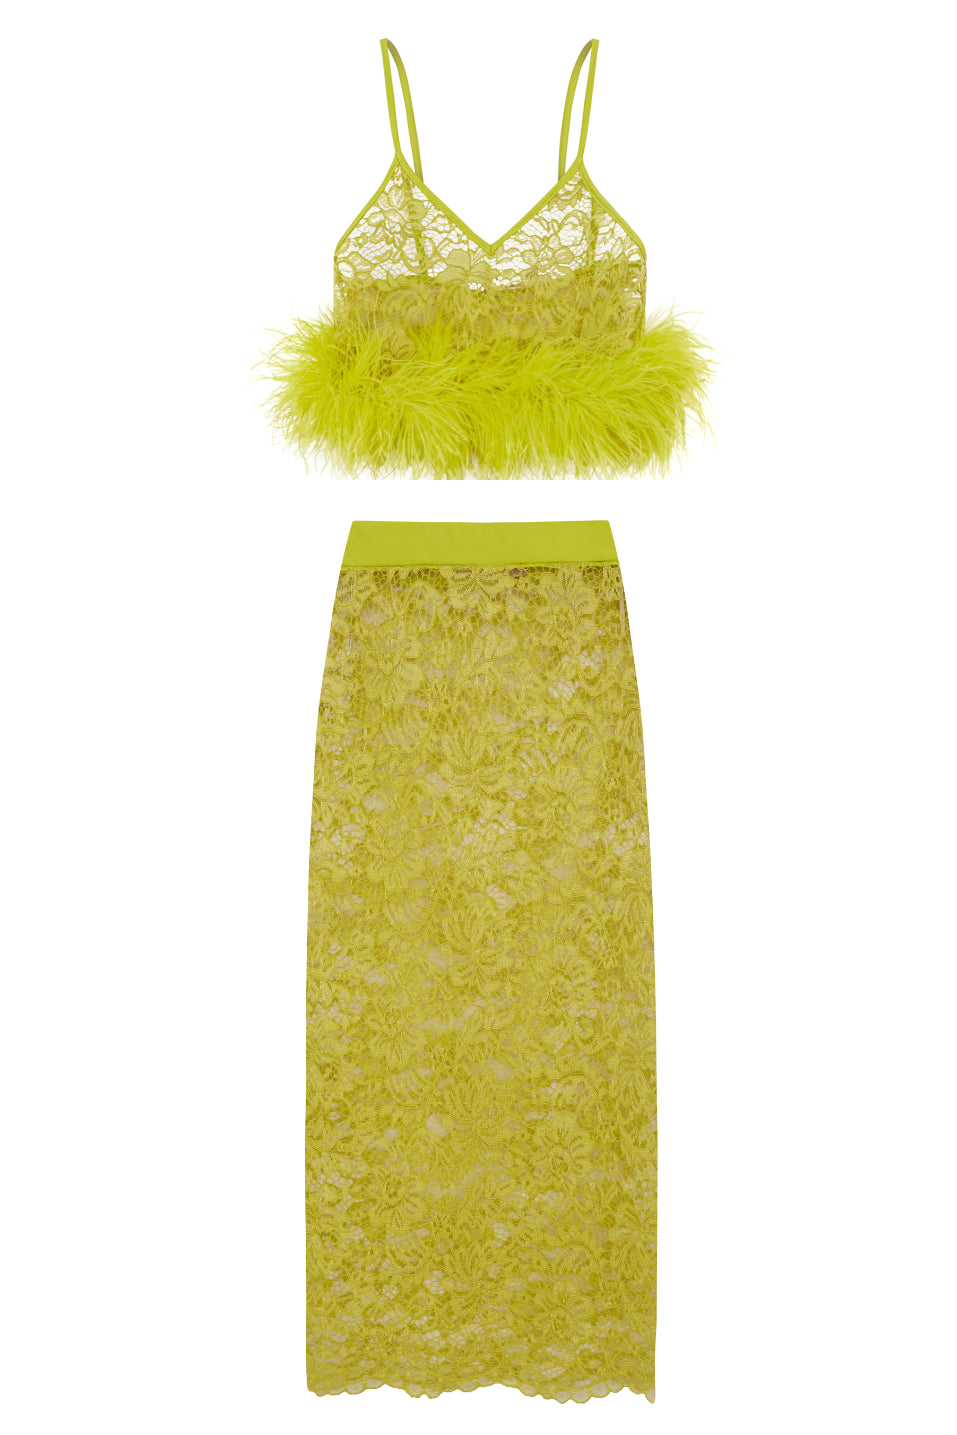 Guipure Lace Citrus Top & Skirt Feathered Set Product